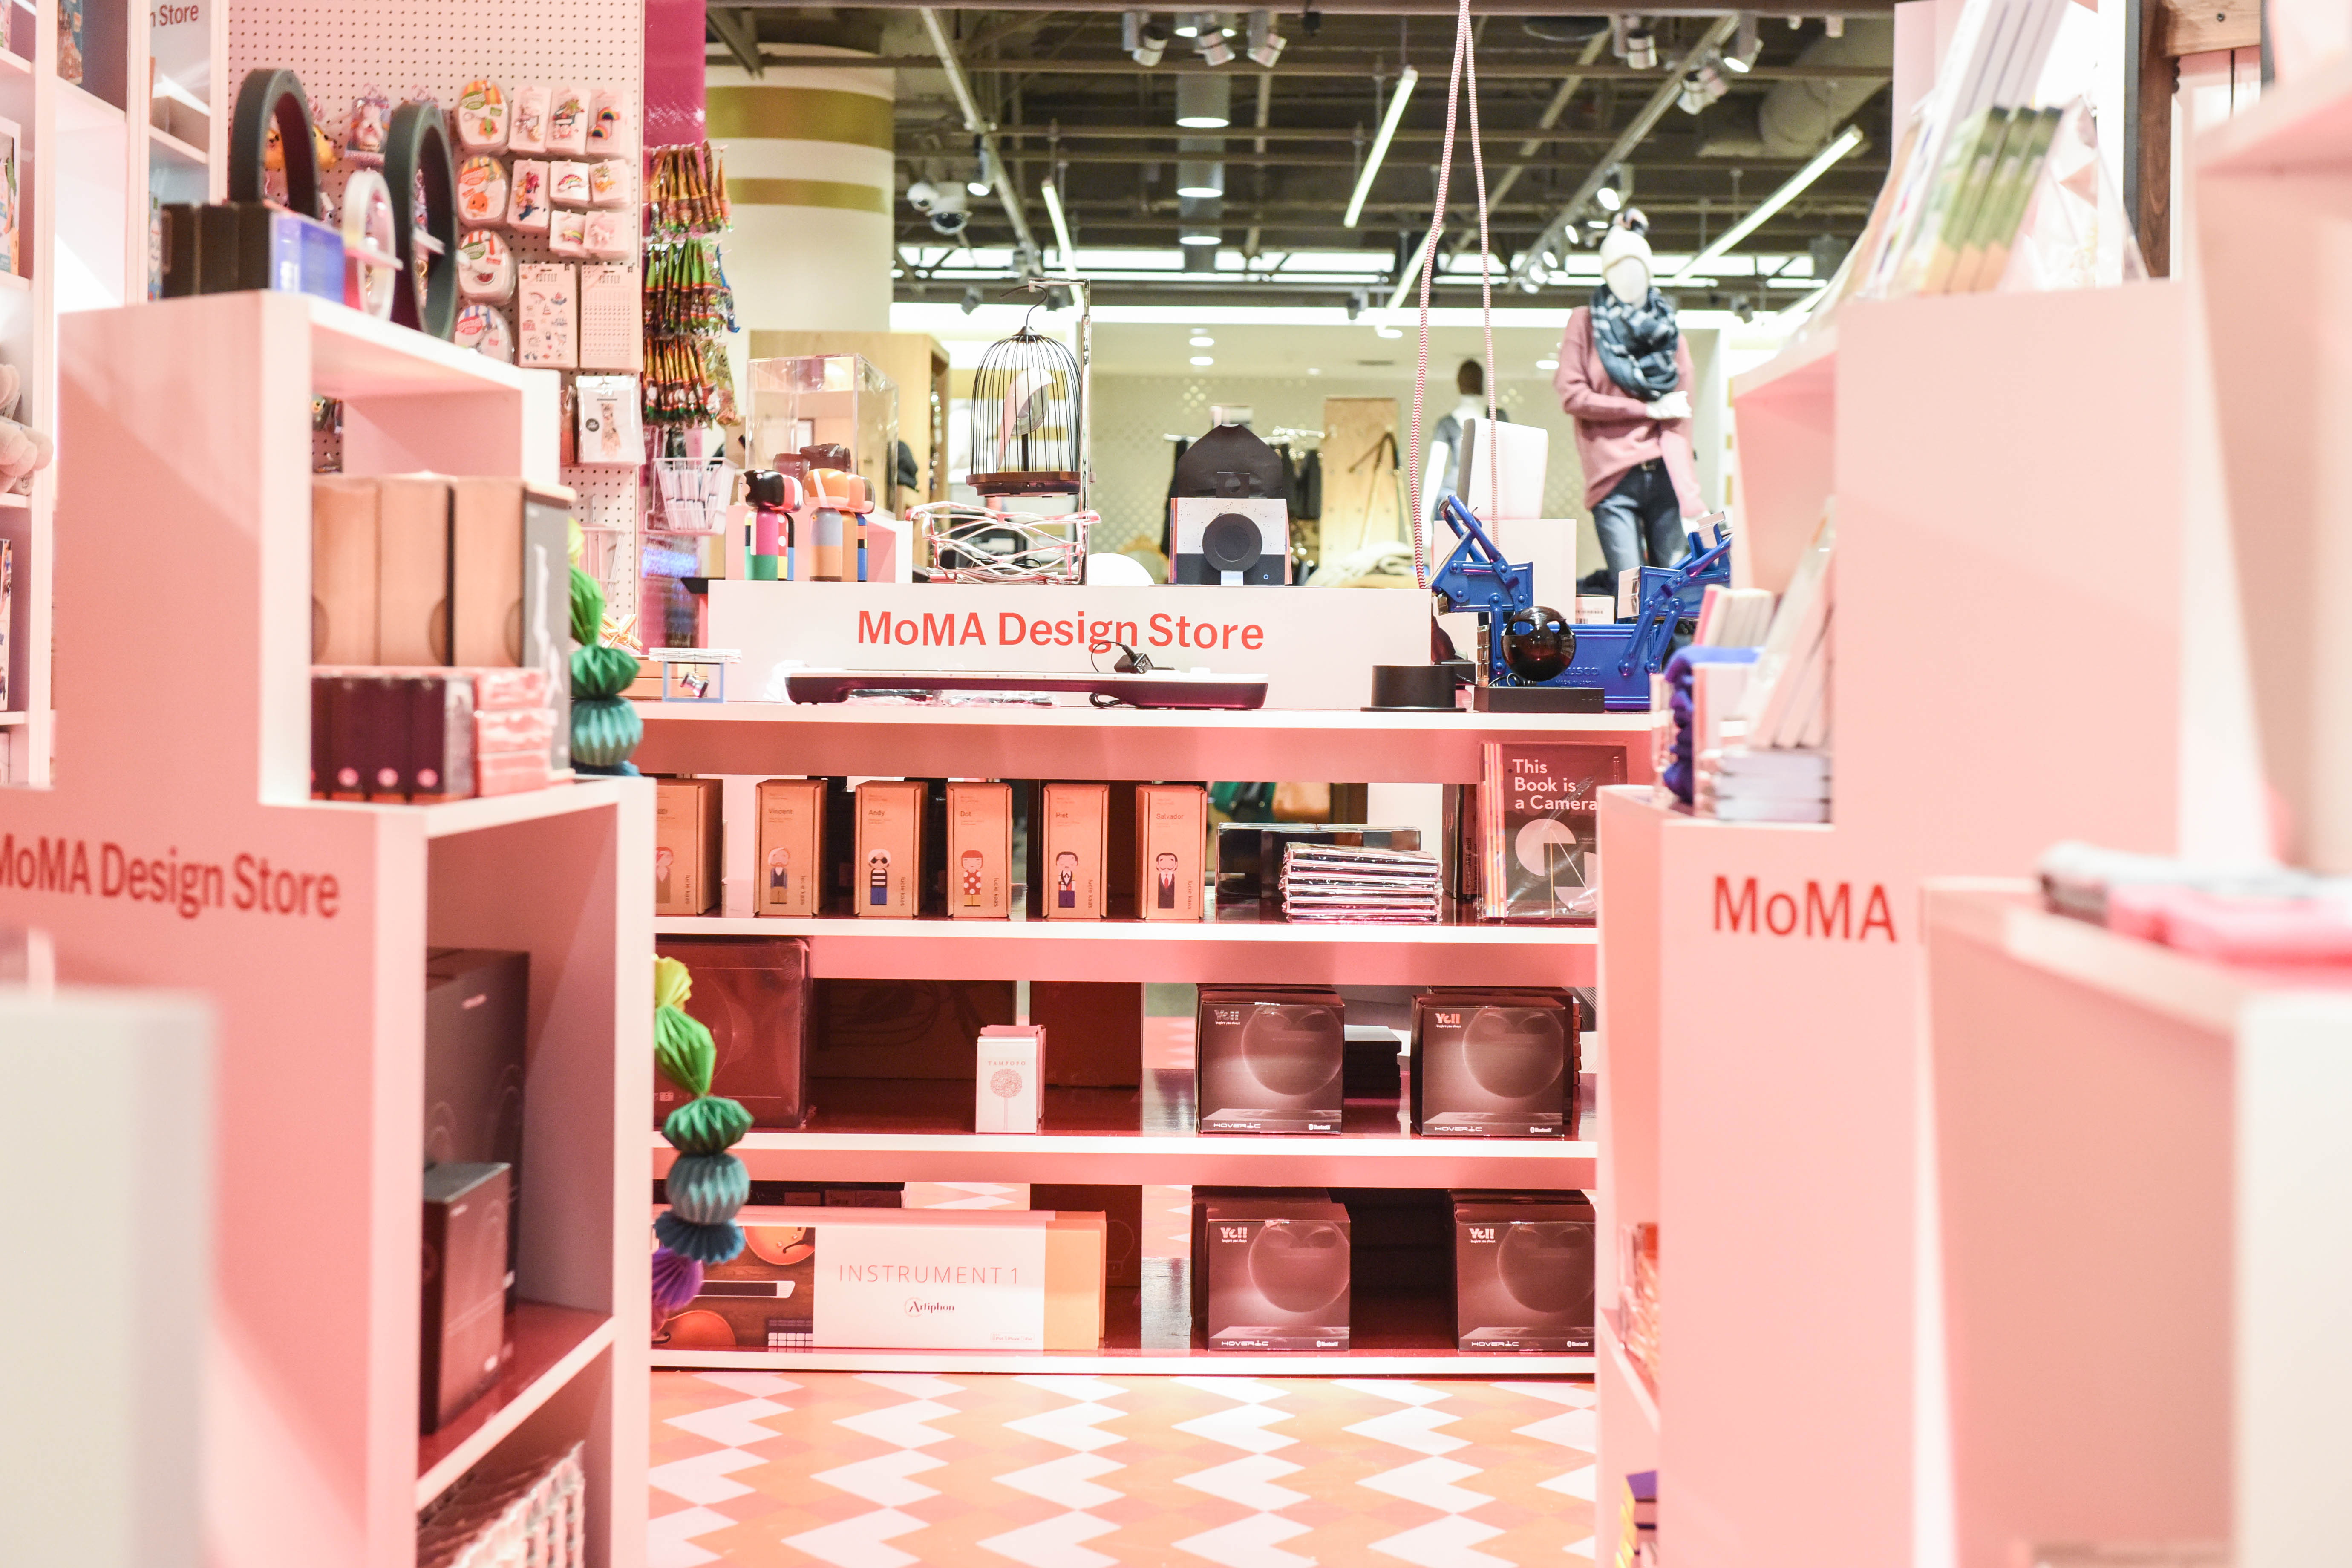 The interior of the Museum of Modern Art pop-up store at the Grove in Los Angeles. The display cases and shelves are pink and there are pink and white tiles on the floor. There are various objects on the shelves. 